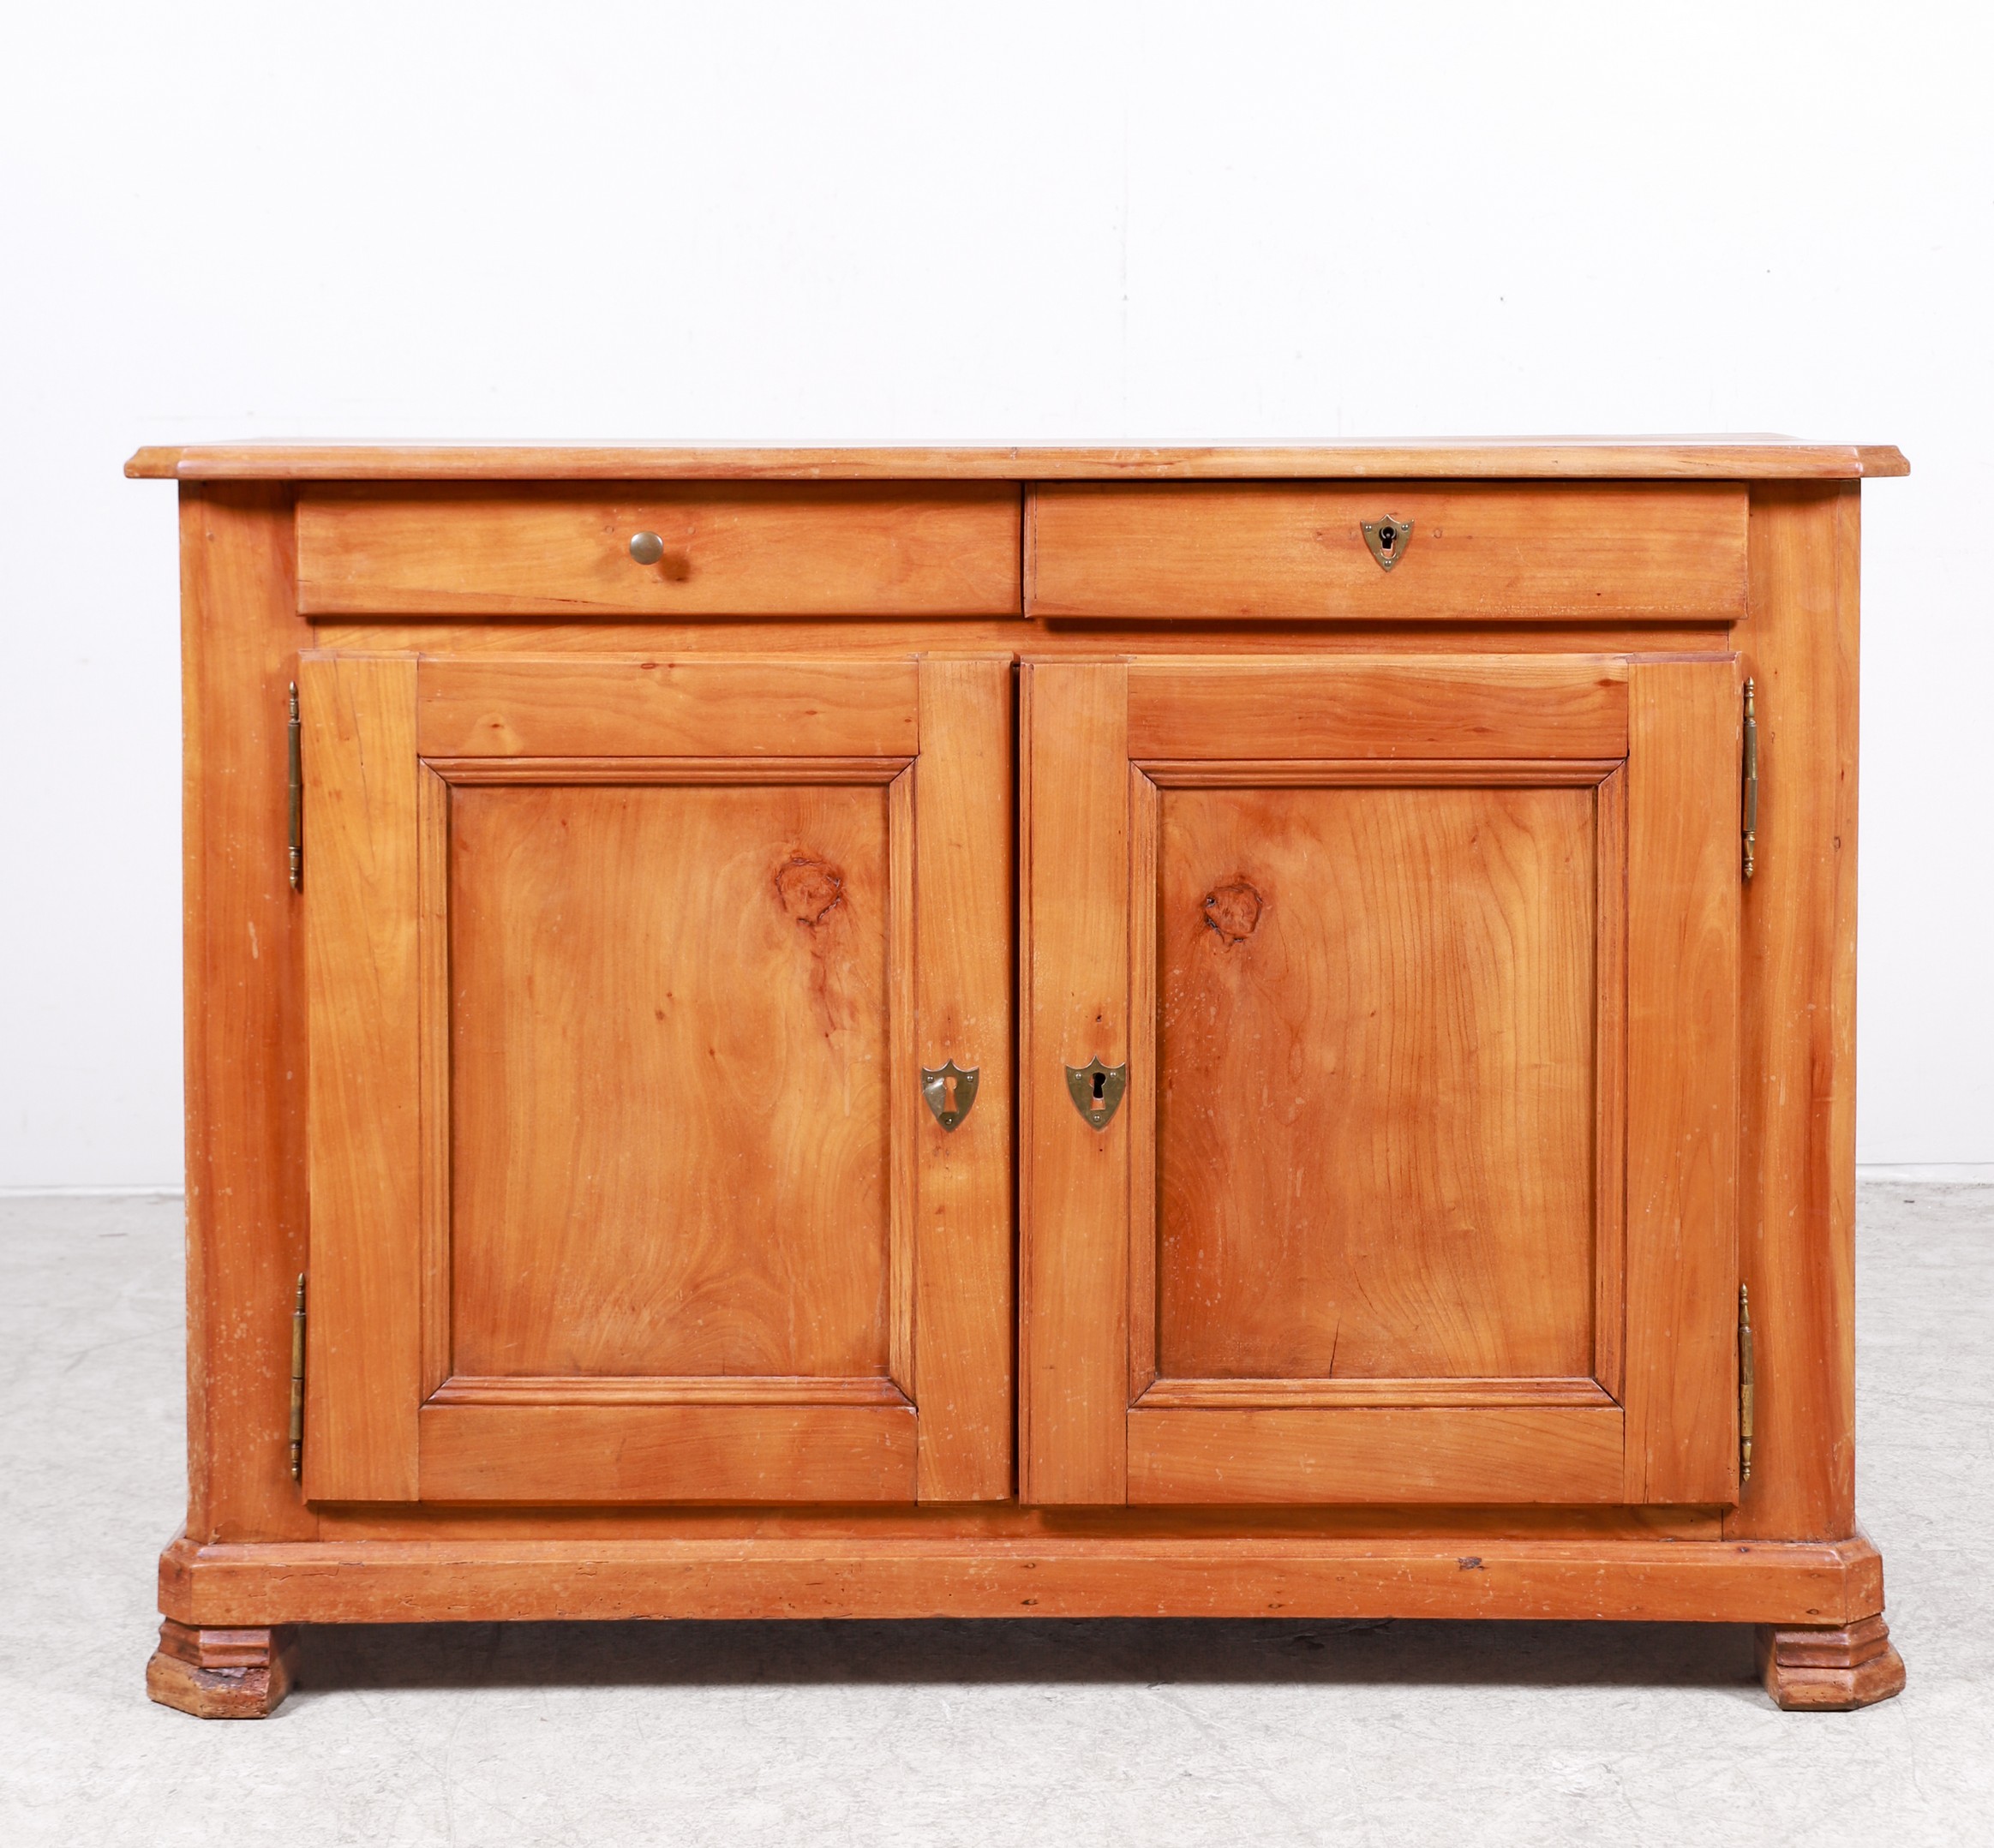 Cherry paneled cabinet two drawers 3b599d